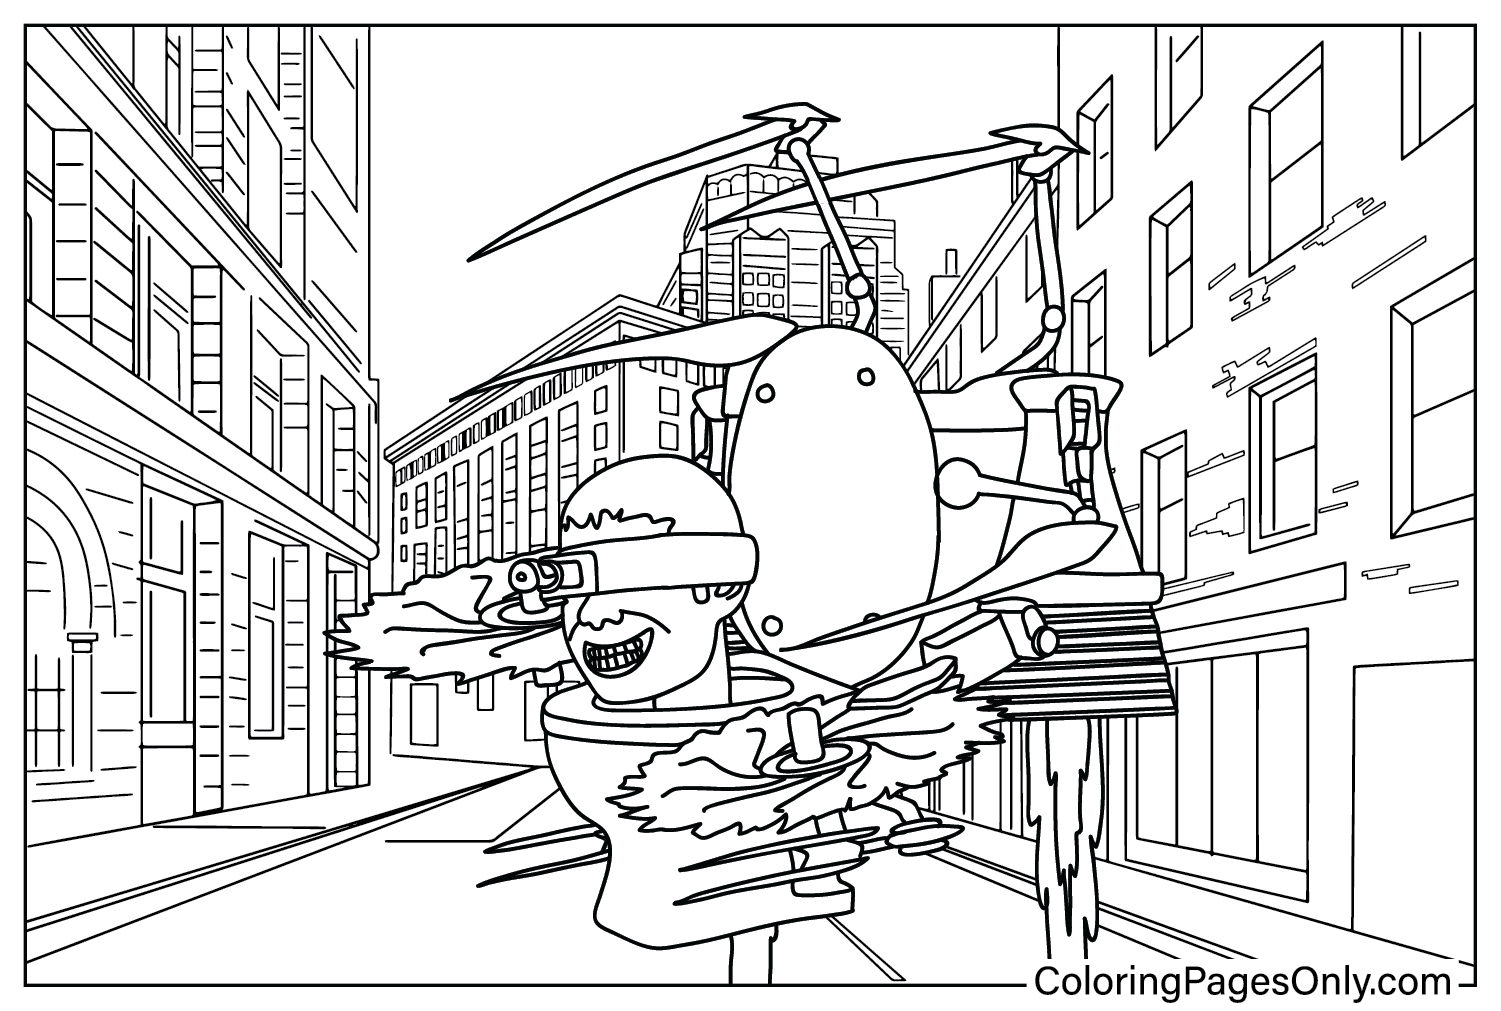 Dual Buzzsaw Mutant Coloring Page from Dual Buzzsaw Mutant